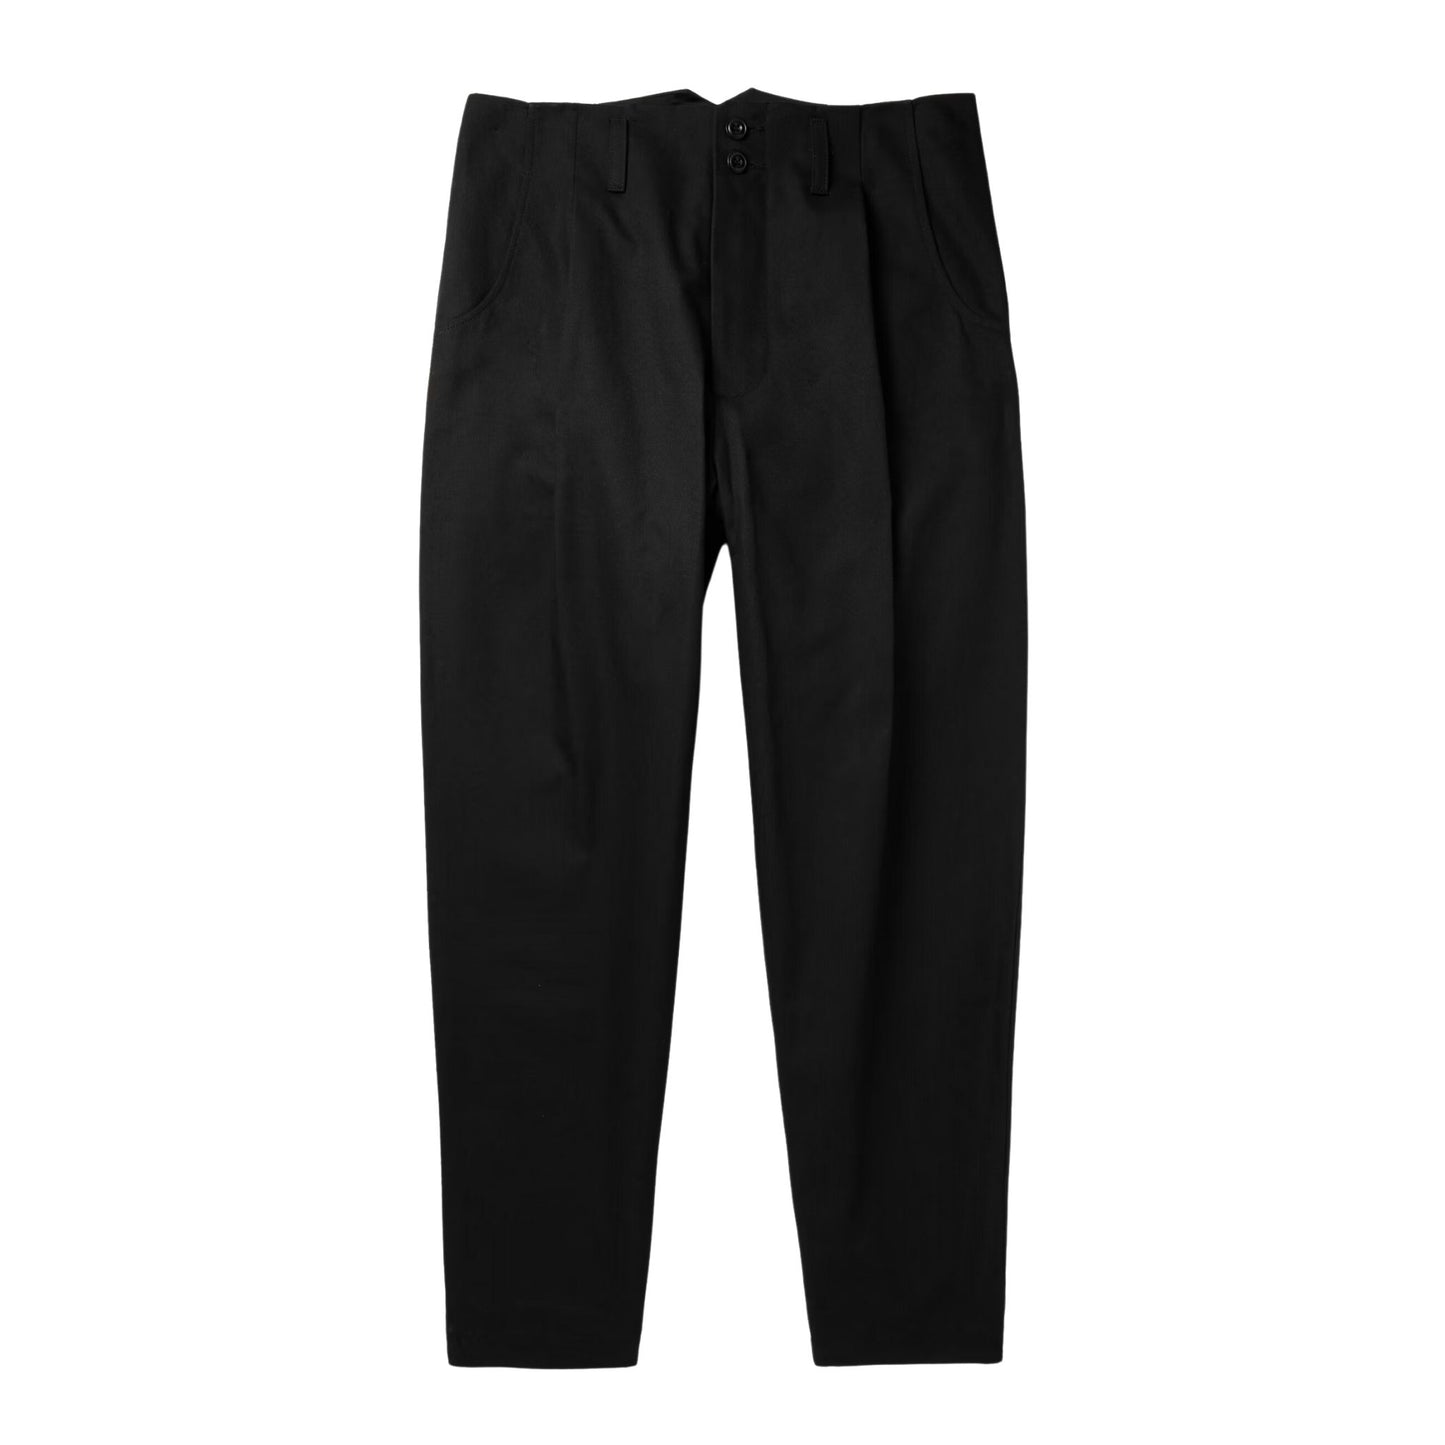 NICHOLAS DALEY - Pleated Trousers